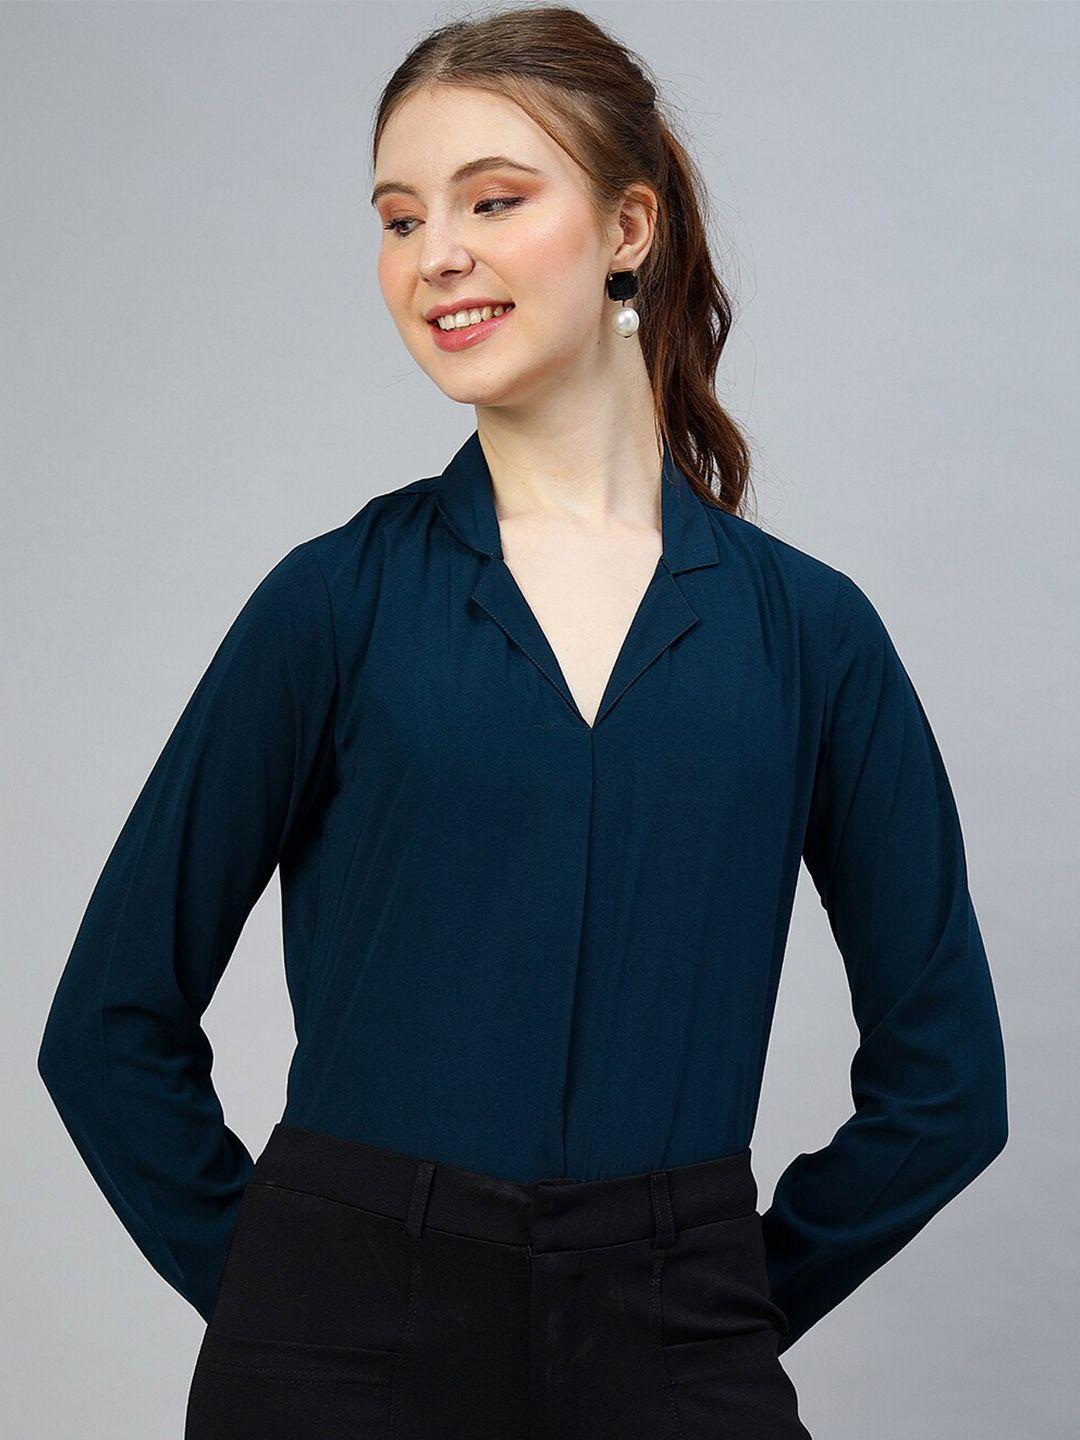 FITHUB Turquoise Blue Roll-Up Sleeves Shirt Style Top